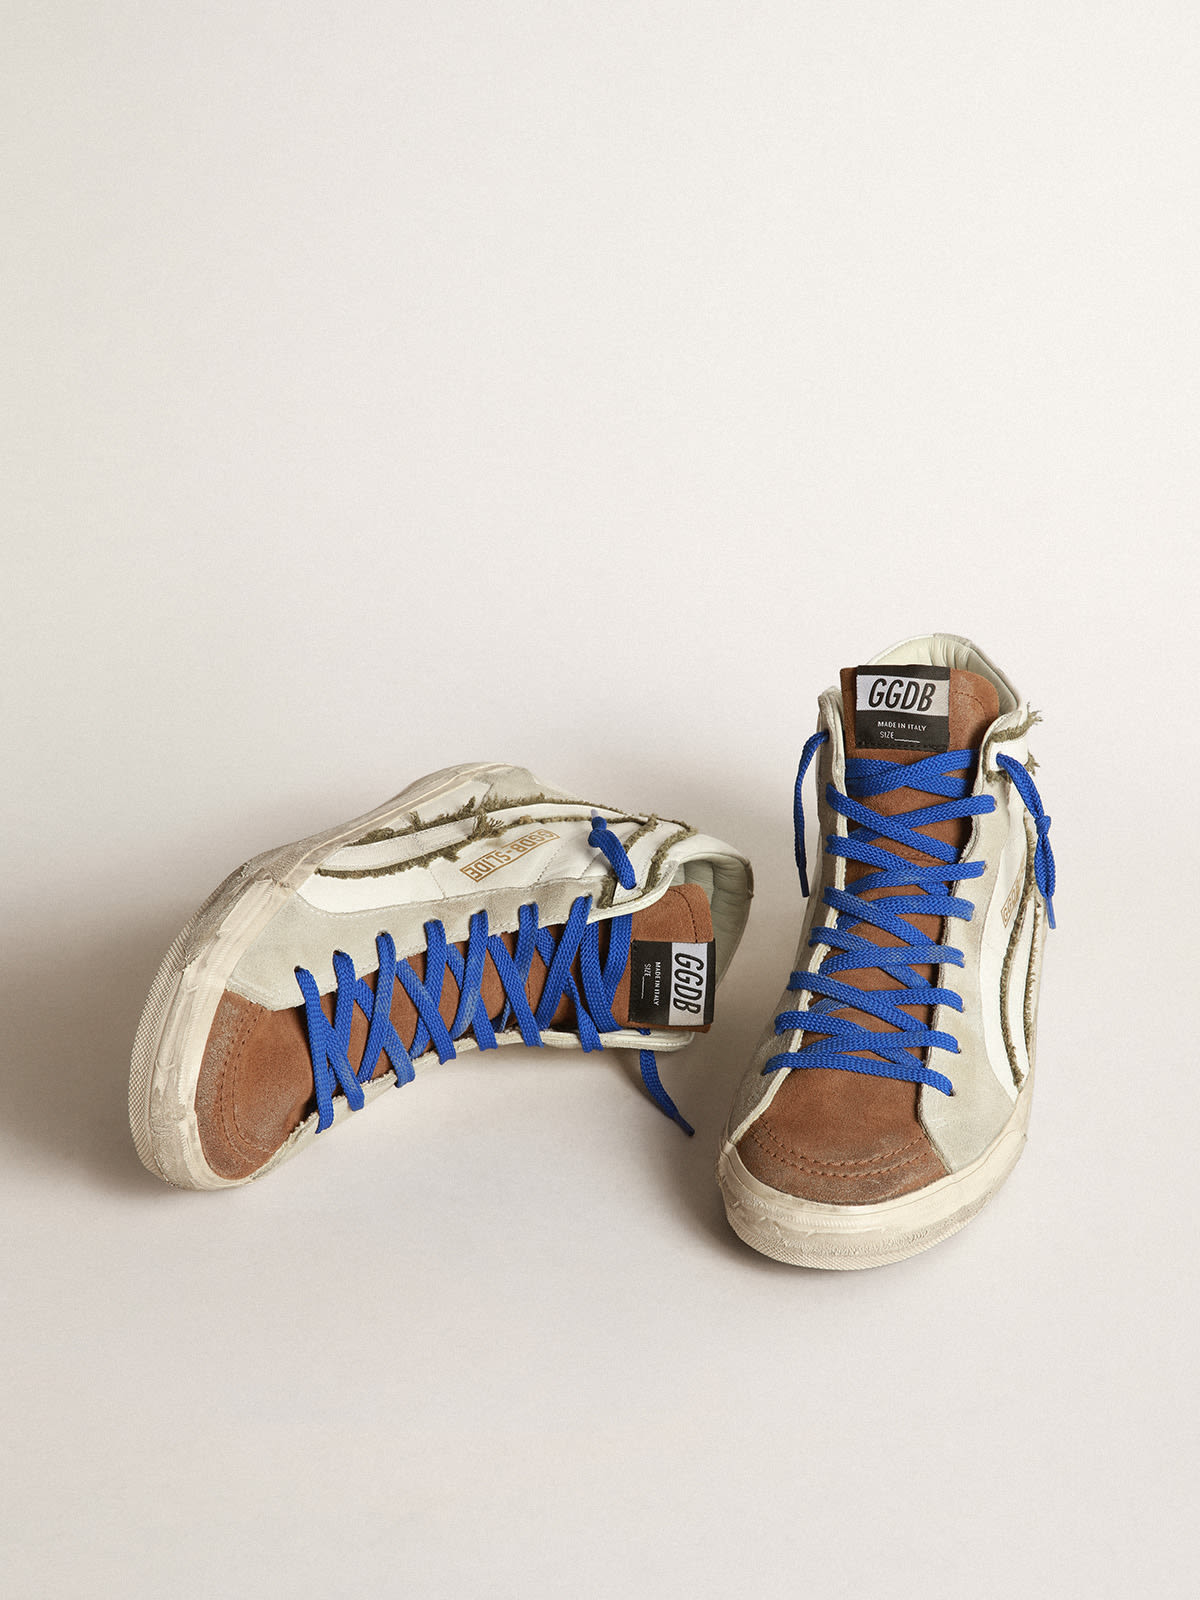 Golden Goose - Leather and suede sneakers with inserts in raw edge canvas in 